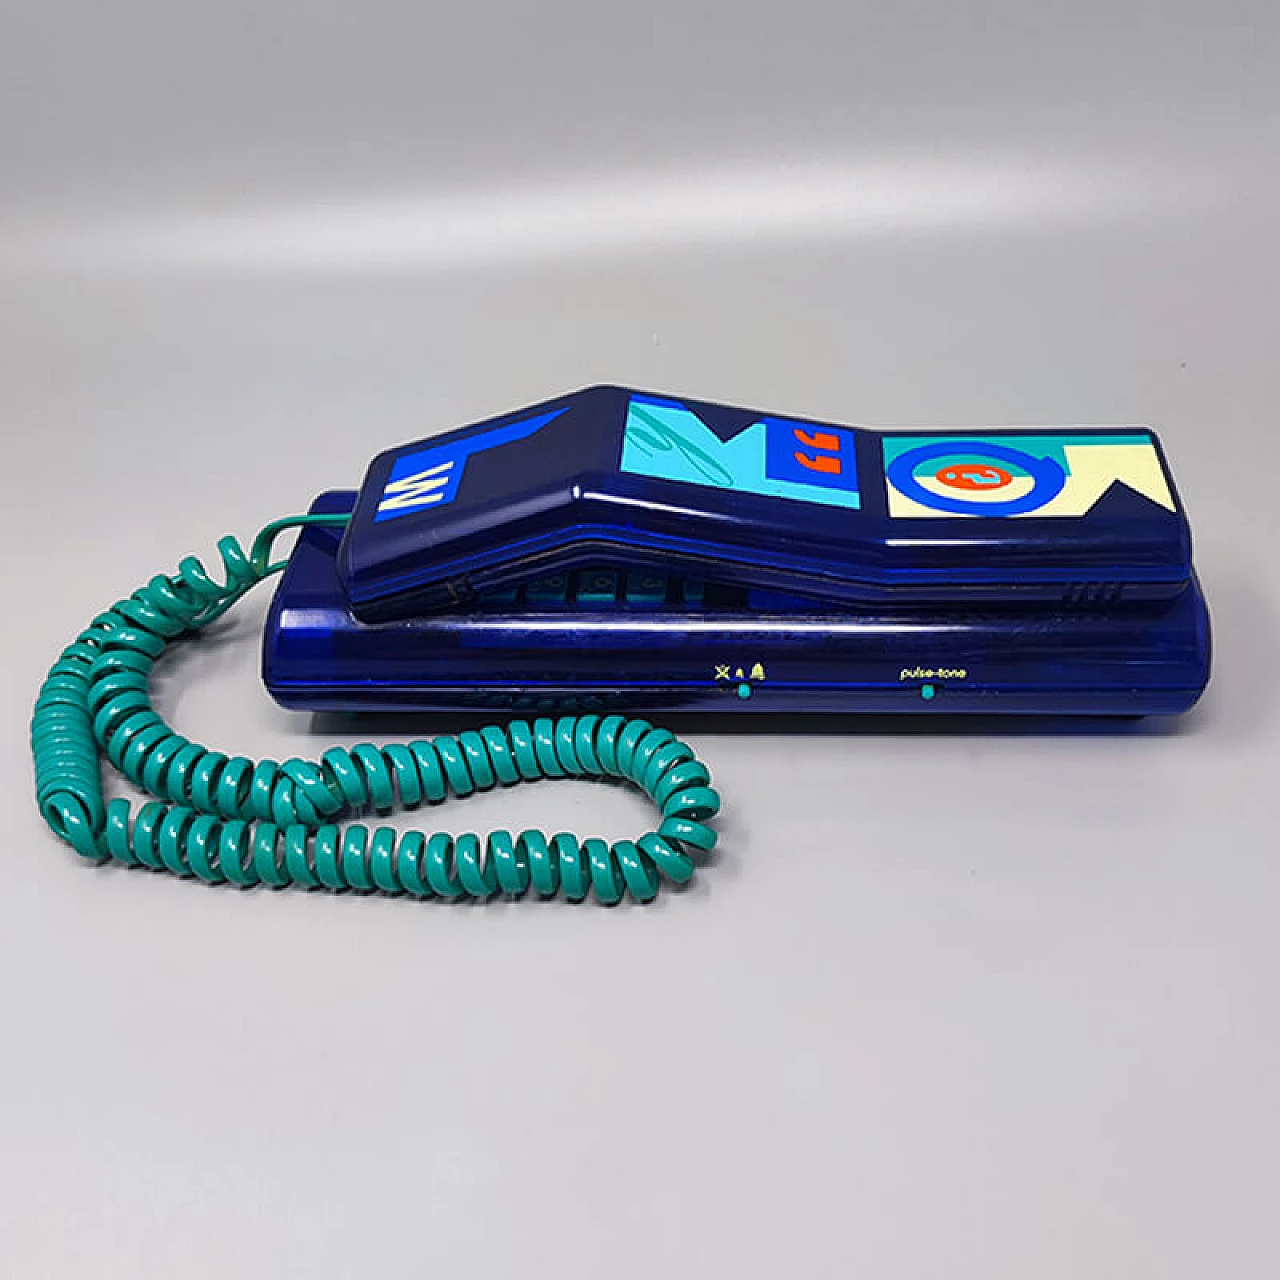 Swatch Twin Deluxe blue phone in Memphis-style, 1980s 2